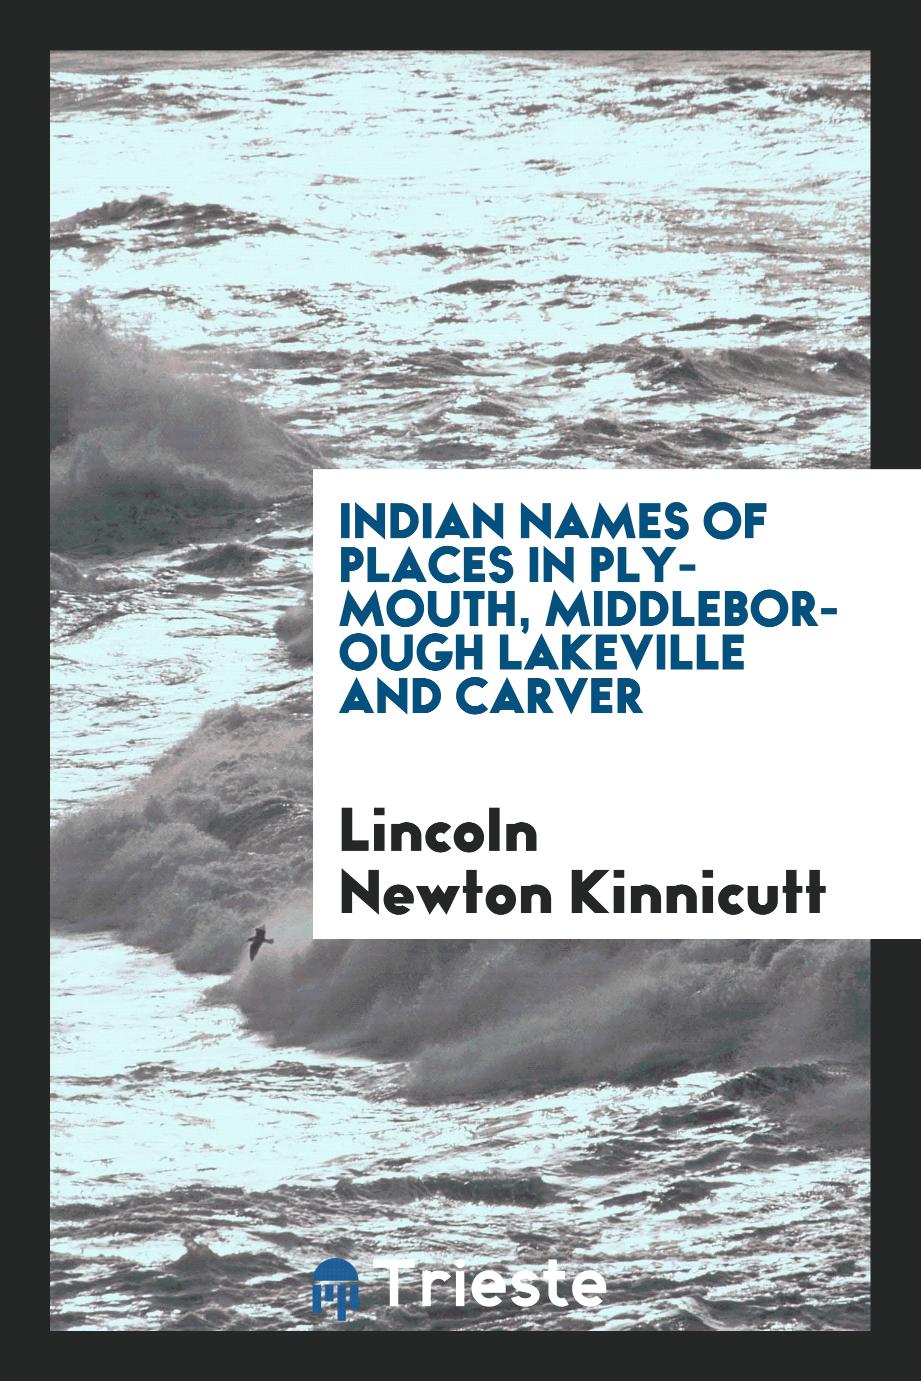 Indian Names of Places in Plymouth, Middleborough Lakeville and Carver